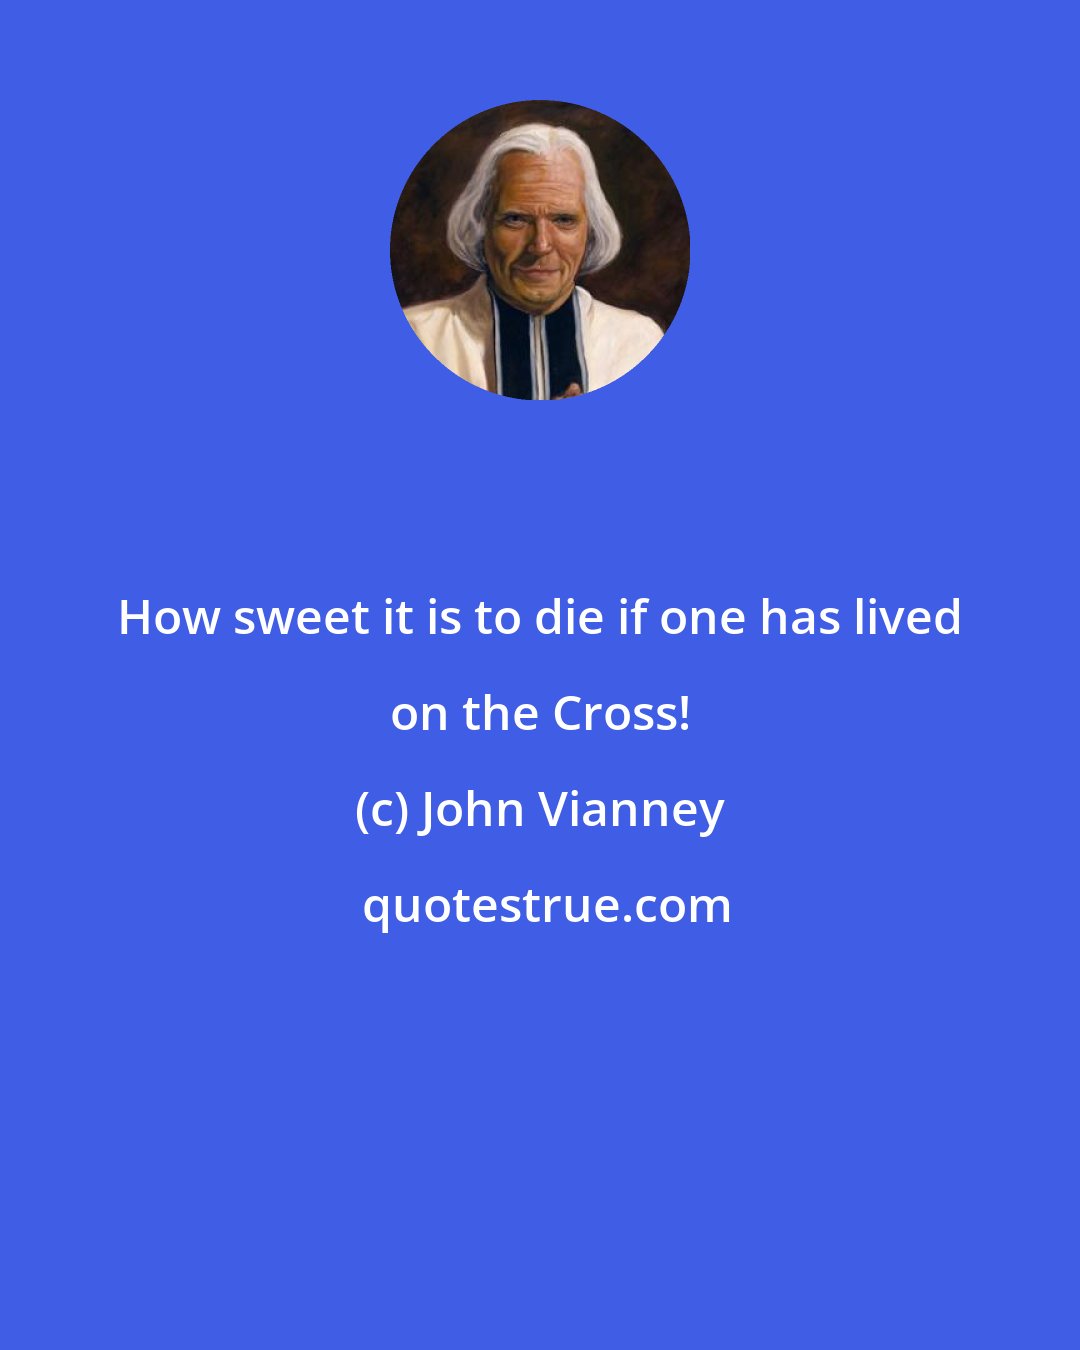 John Vianney: How sweet it is to die if one has lived on the Cross!